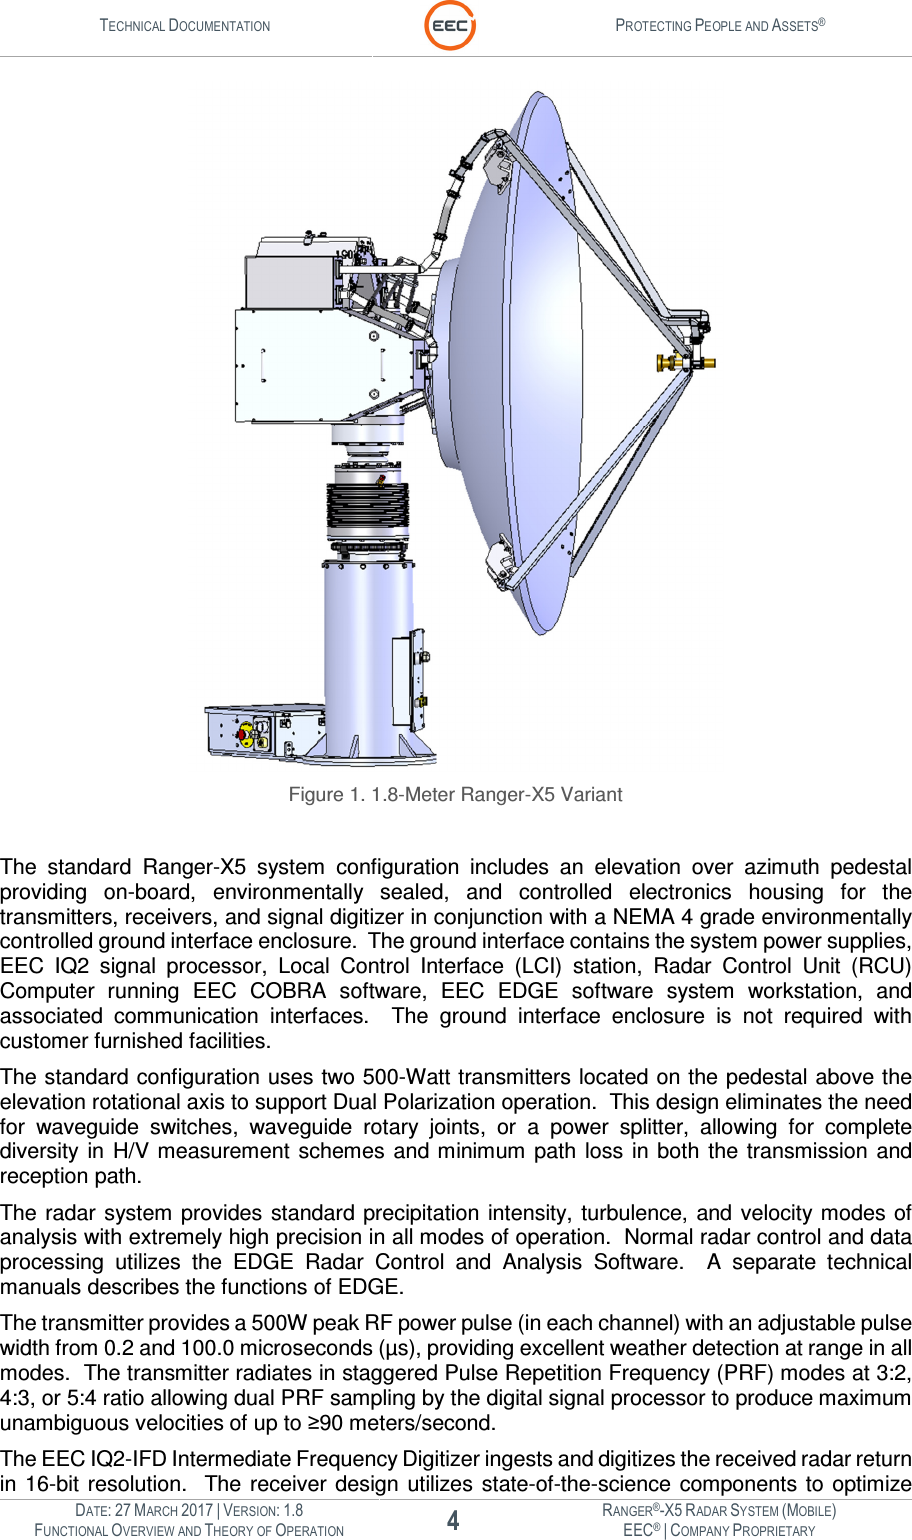 TECHNICAL DOCUMENTATION  PROTECTING PEOPLE AND ASSETS®  DATE: 27 MARCH 2017 | VERSION: 1.8 4 RANGER®-X5 RADAR SYSTEM (MOBILE) FUNCTIONAL OVERVIEW AND THEORY OF OPERATION EEC® | COMPANY PROPRIETARY   Figure 1. 1.8-Meter Ranger-X5 Variant  The  standard  Ranger-X5  system  configuration  includes  an  elevation  over  azimuth  pedestal providing  on-board,  environmentally  sealed,  and  controlled  electronics  housing  for  the transmitters, receivers, and signal digitizer in conjunction with a NEMA 4 grade environmentally controlled ground interface enclosure.  The ground interface contains the system power supplies, EEC  IQ2  signal  processor,  Local  Control  Interface  (LCI)  station,  Radar  Control  Unit  (RCU) Computer  running  EEC  COBRA  software,  EEC  EDGE  software  system  workstation,  and associated  communication  interfaces.    The  ground  interface  enclosure  is  not  required  with customer furnished facilities. The standard configuration uses two 500-Watt transmitters located on the pedestal above the elevation rotational axis to support Dual Polarization operation.  This design eliminates the need for  waveguide  switches,  waveguide  rotary  joints,  or  a  power  splitter,  allowing  for  complete diversity  in  H/V  measurement  schemes  and minimum  path  loss  in  both  the  transmission  and reception path. The radar  system provides standard precipitation  intensity,  turbulence, and  velocity modes of analysis with extremely high precision in all modes of operation.  Normal radar control and data processing  utilizes  the  EDGE  Radar  Control  and  Analysis  Software.    A  separate  technical manuals describes the functions of EDGE. The transmitter provides a 500W peak RF power pulse (in each channel) with an adjustable pulse width from 0.2 and 100.0 microseconds (µs), providing excellent weather detection at range in all modes.  The transmitter radiates in staggered Pulse Repetition Frequency (PRF) modes at 3:2, 4:3, or 5:4 ratio allowing dual PRF sampling by the digital signal processor to produce maximum unambiguous velocities of up to ≥90 meters/second. The EEC IQ2-IFD Intermediate Frequency Digitizer ingests and digitizes the received radar return in 16-bit  resolution.    The  receiver design  utilizes state-of-the-science  components to  optimize 